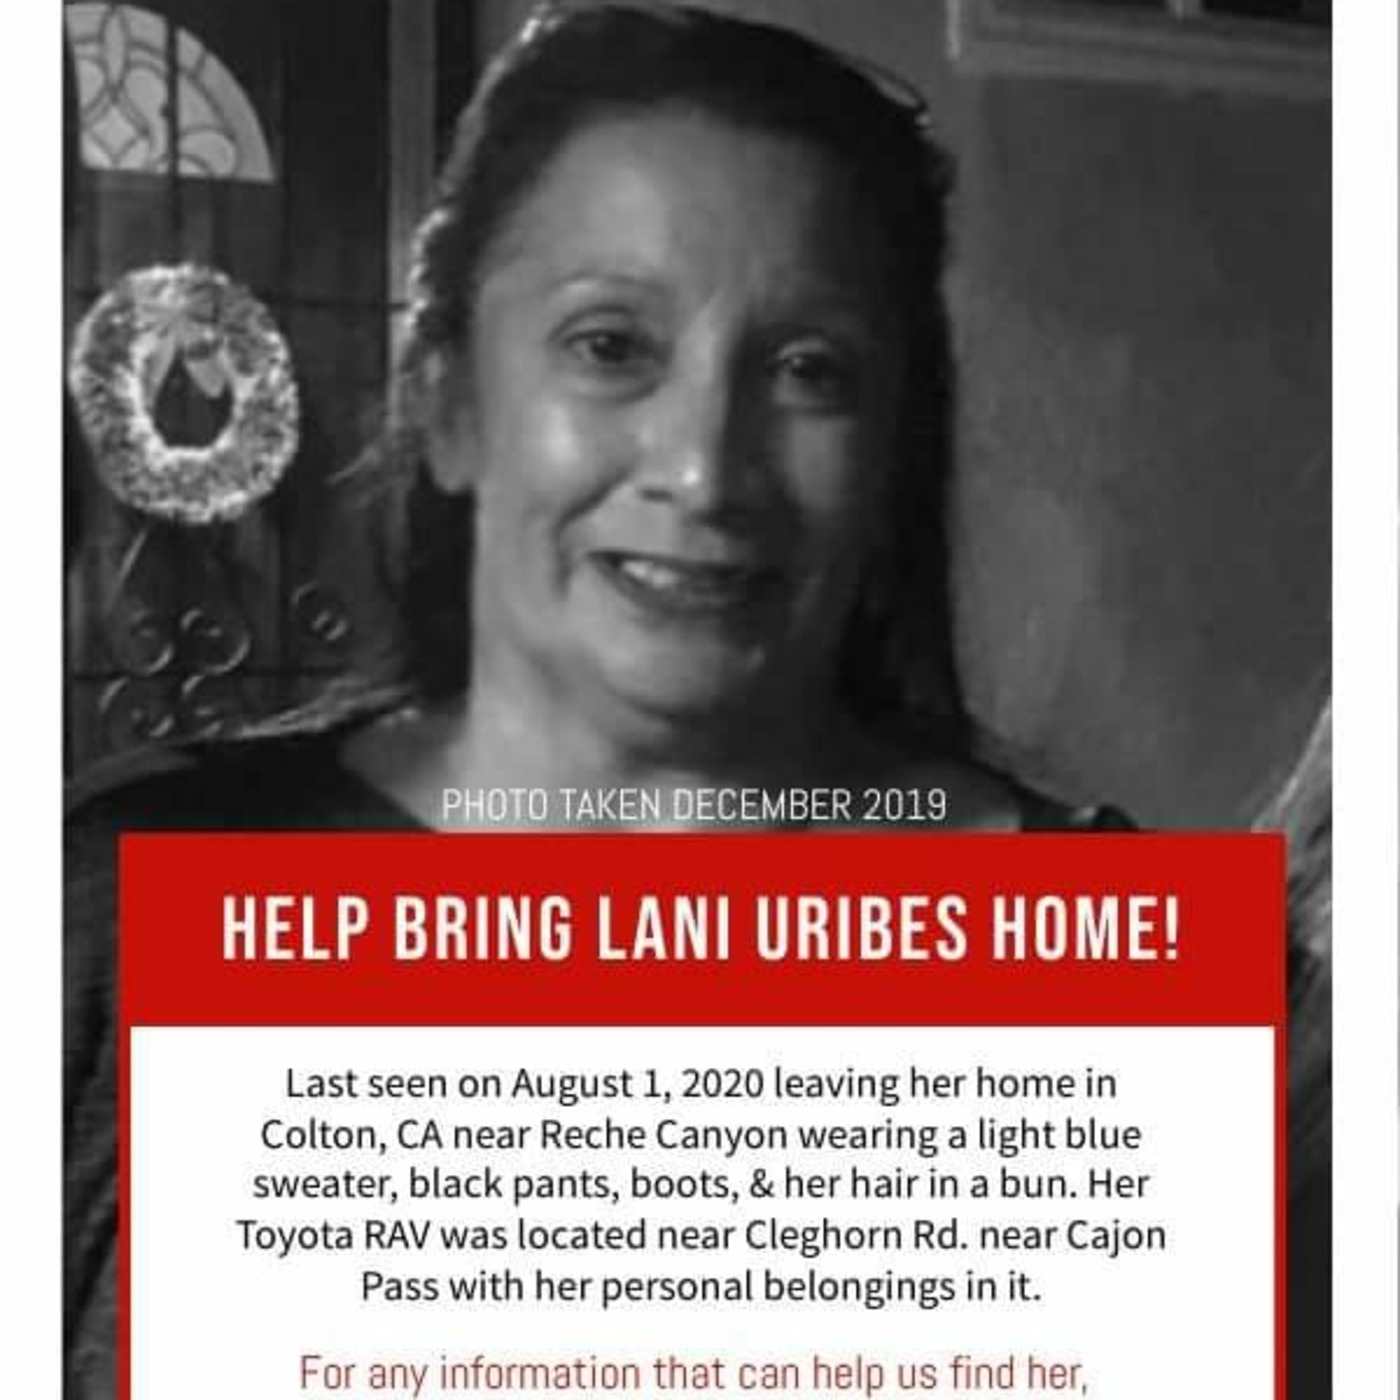 Episode 2: The Case of Lani Uribes - Part two